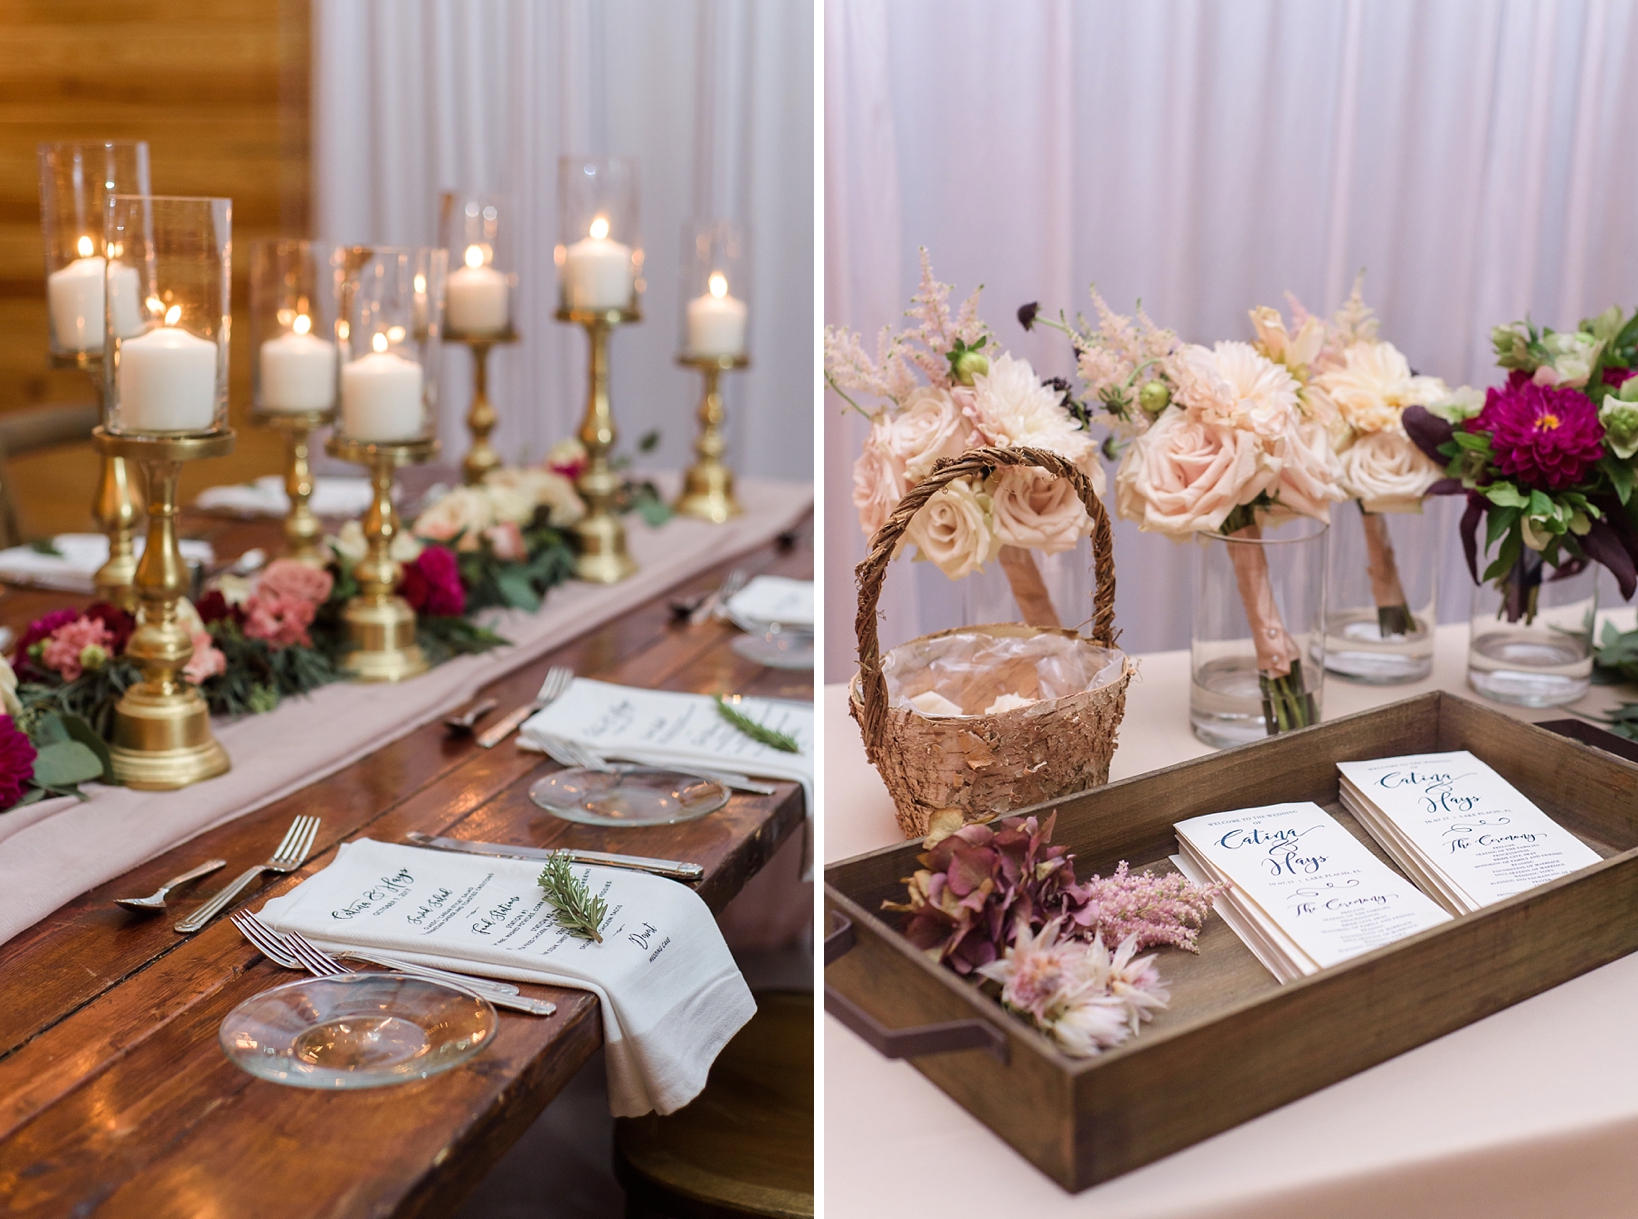 Table details including menus printed on linen napkins and rows of candles